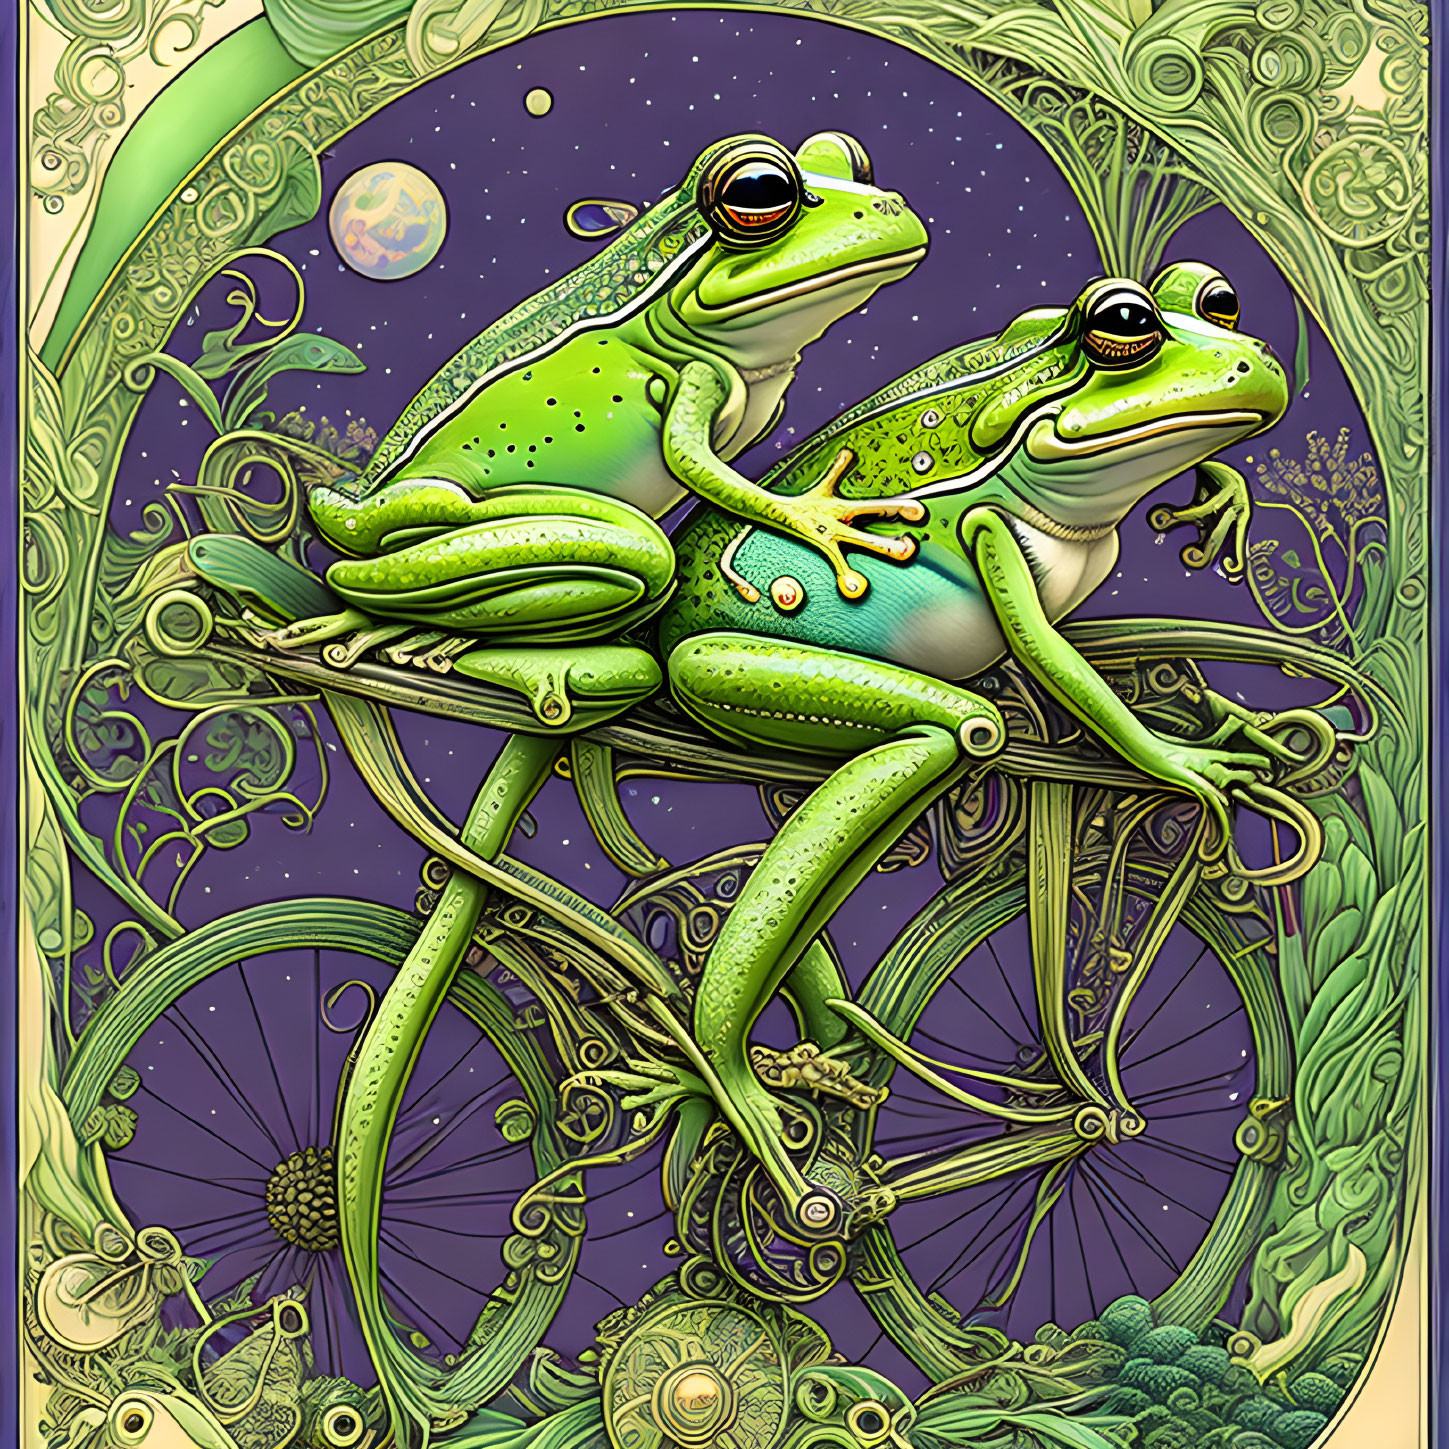 Stylized anthropomorphic frogs on whimsical bicycle with swirling patterns